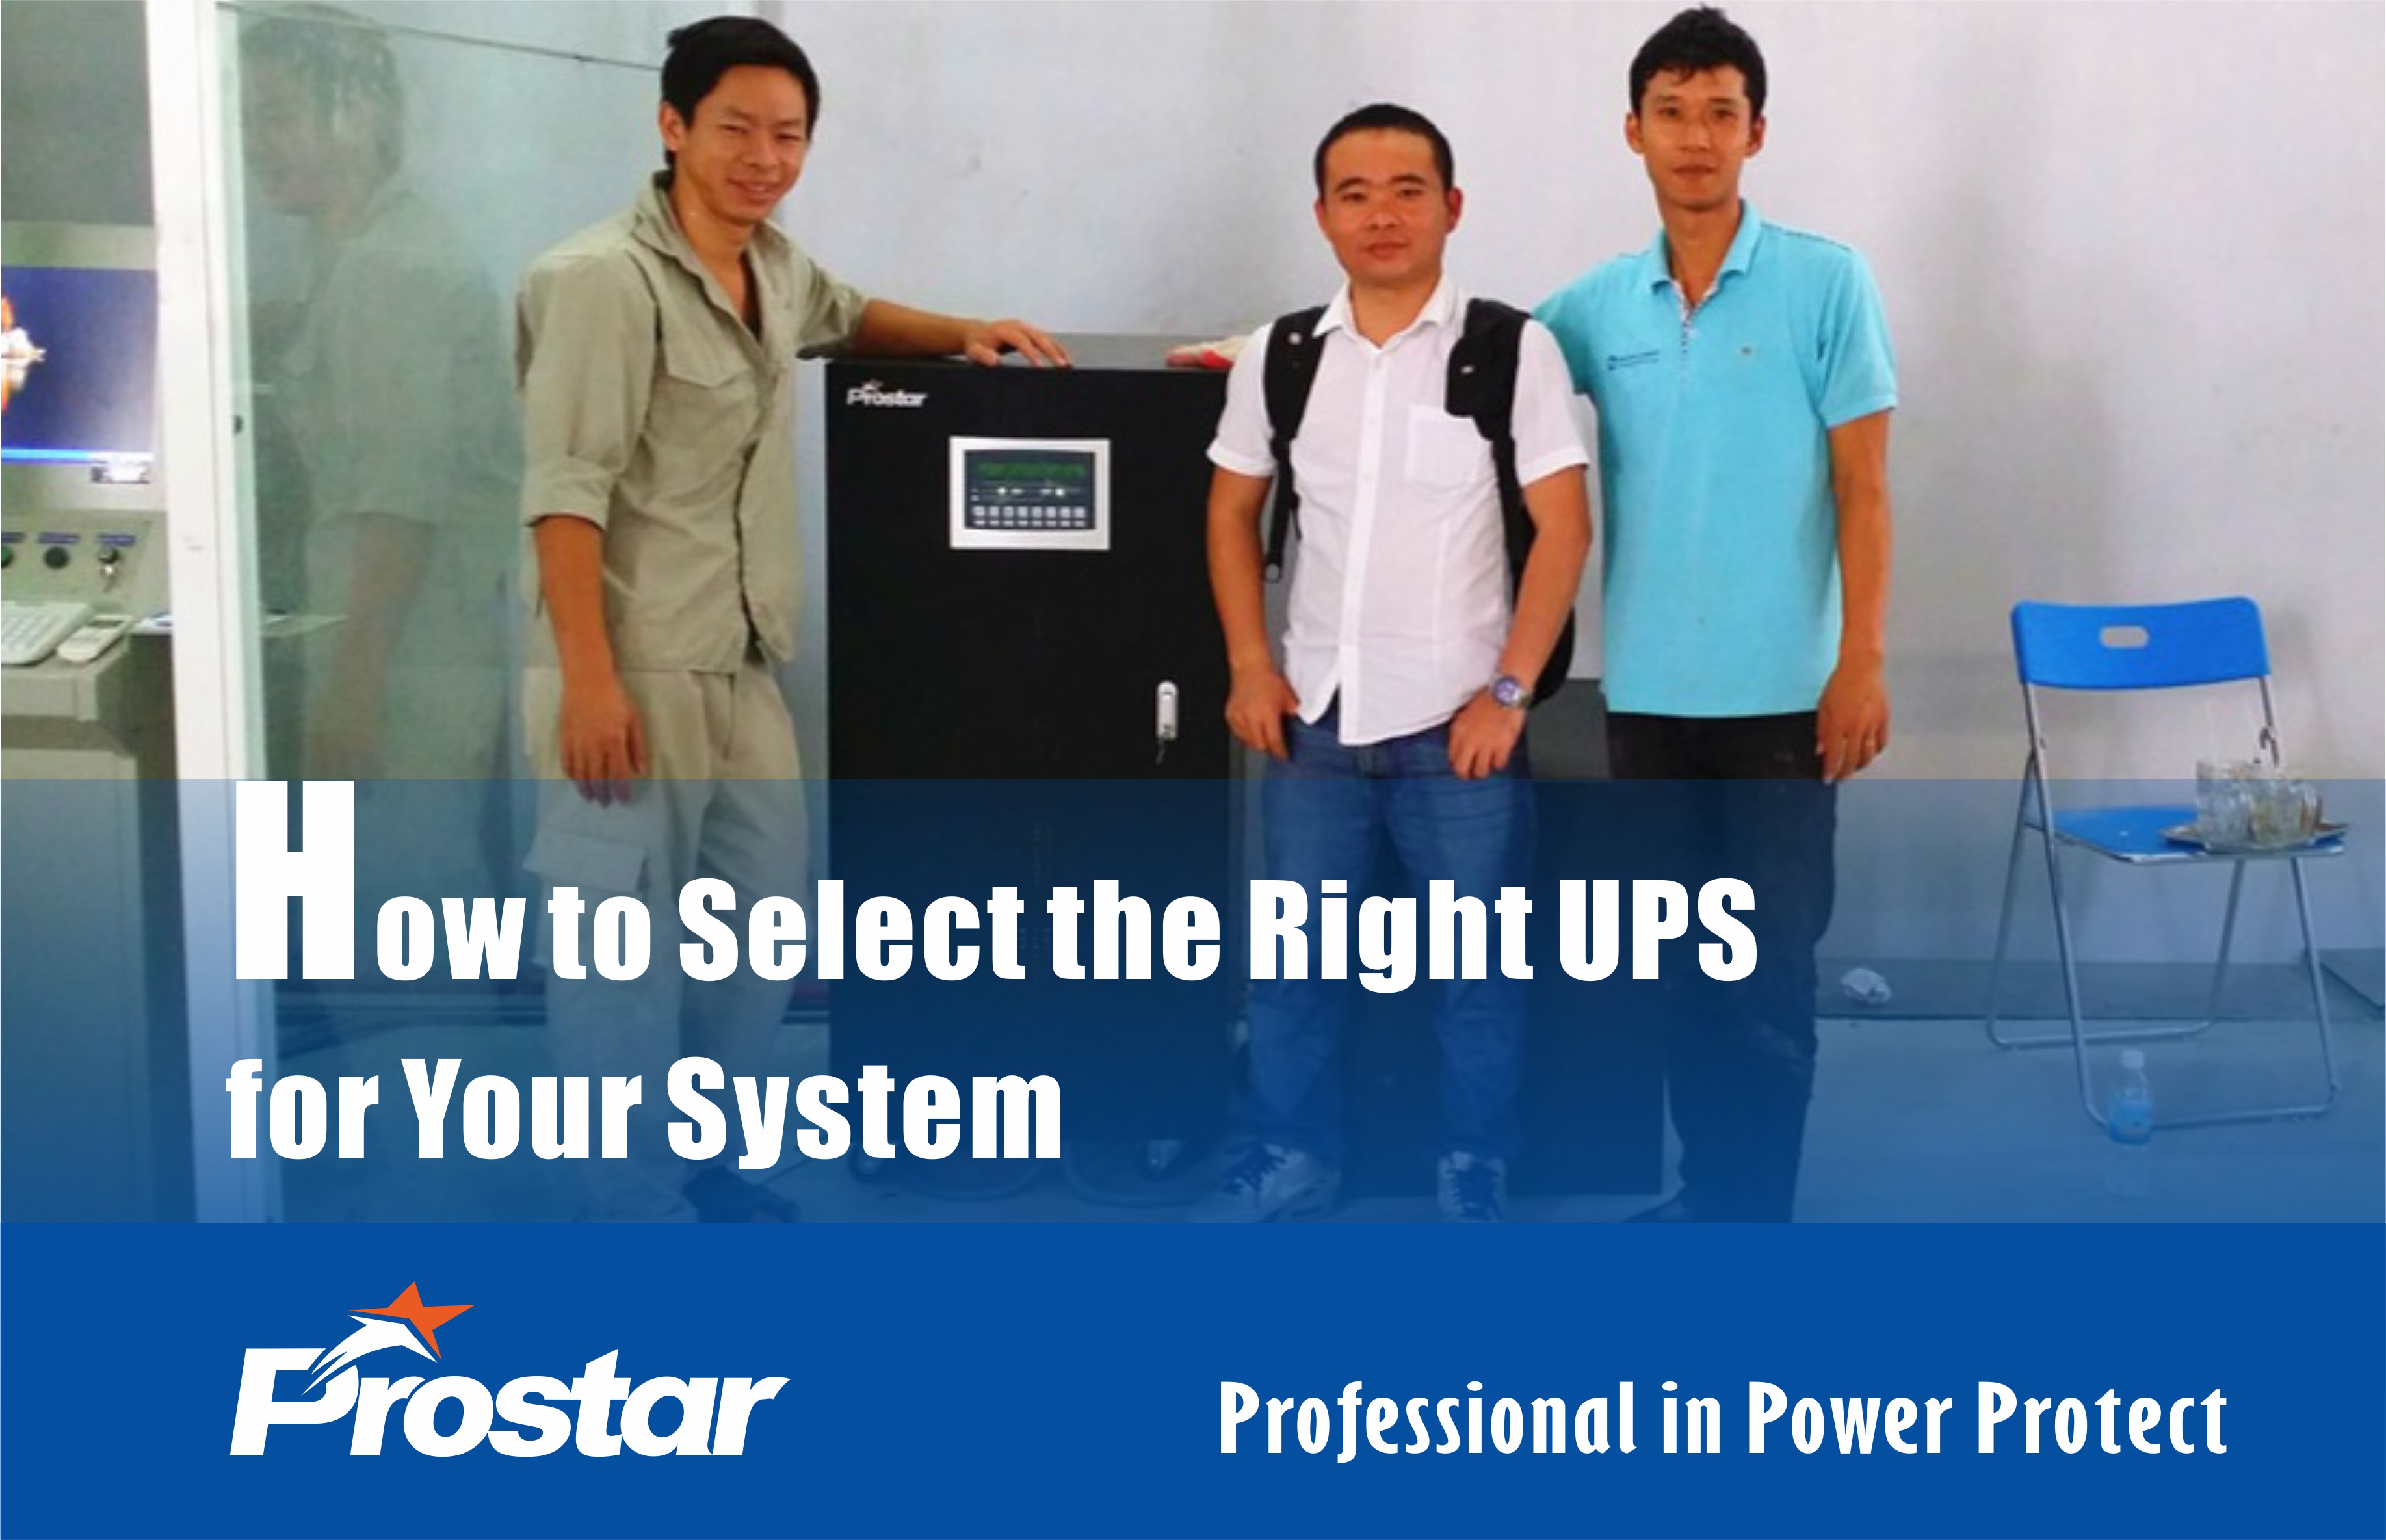 How to Select the Right UPS for Your System